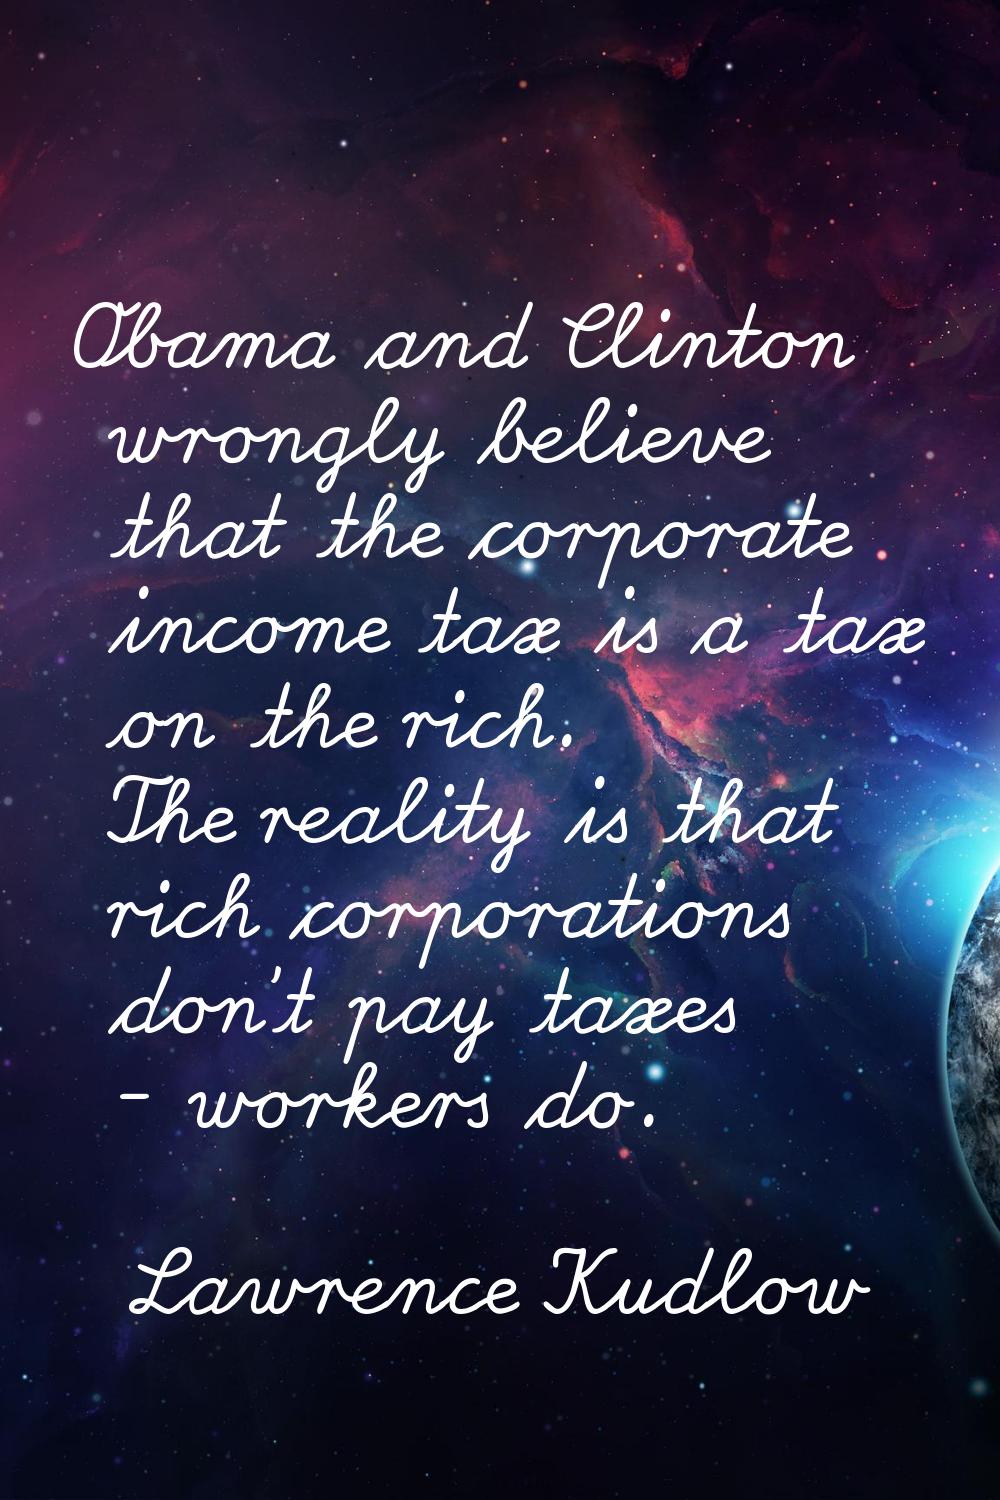 Obama and Clinton wrongly believe that the corporate income tax is a tax on the rich. The reality i